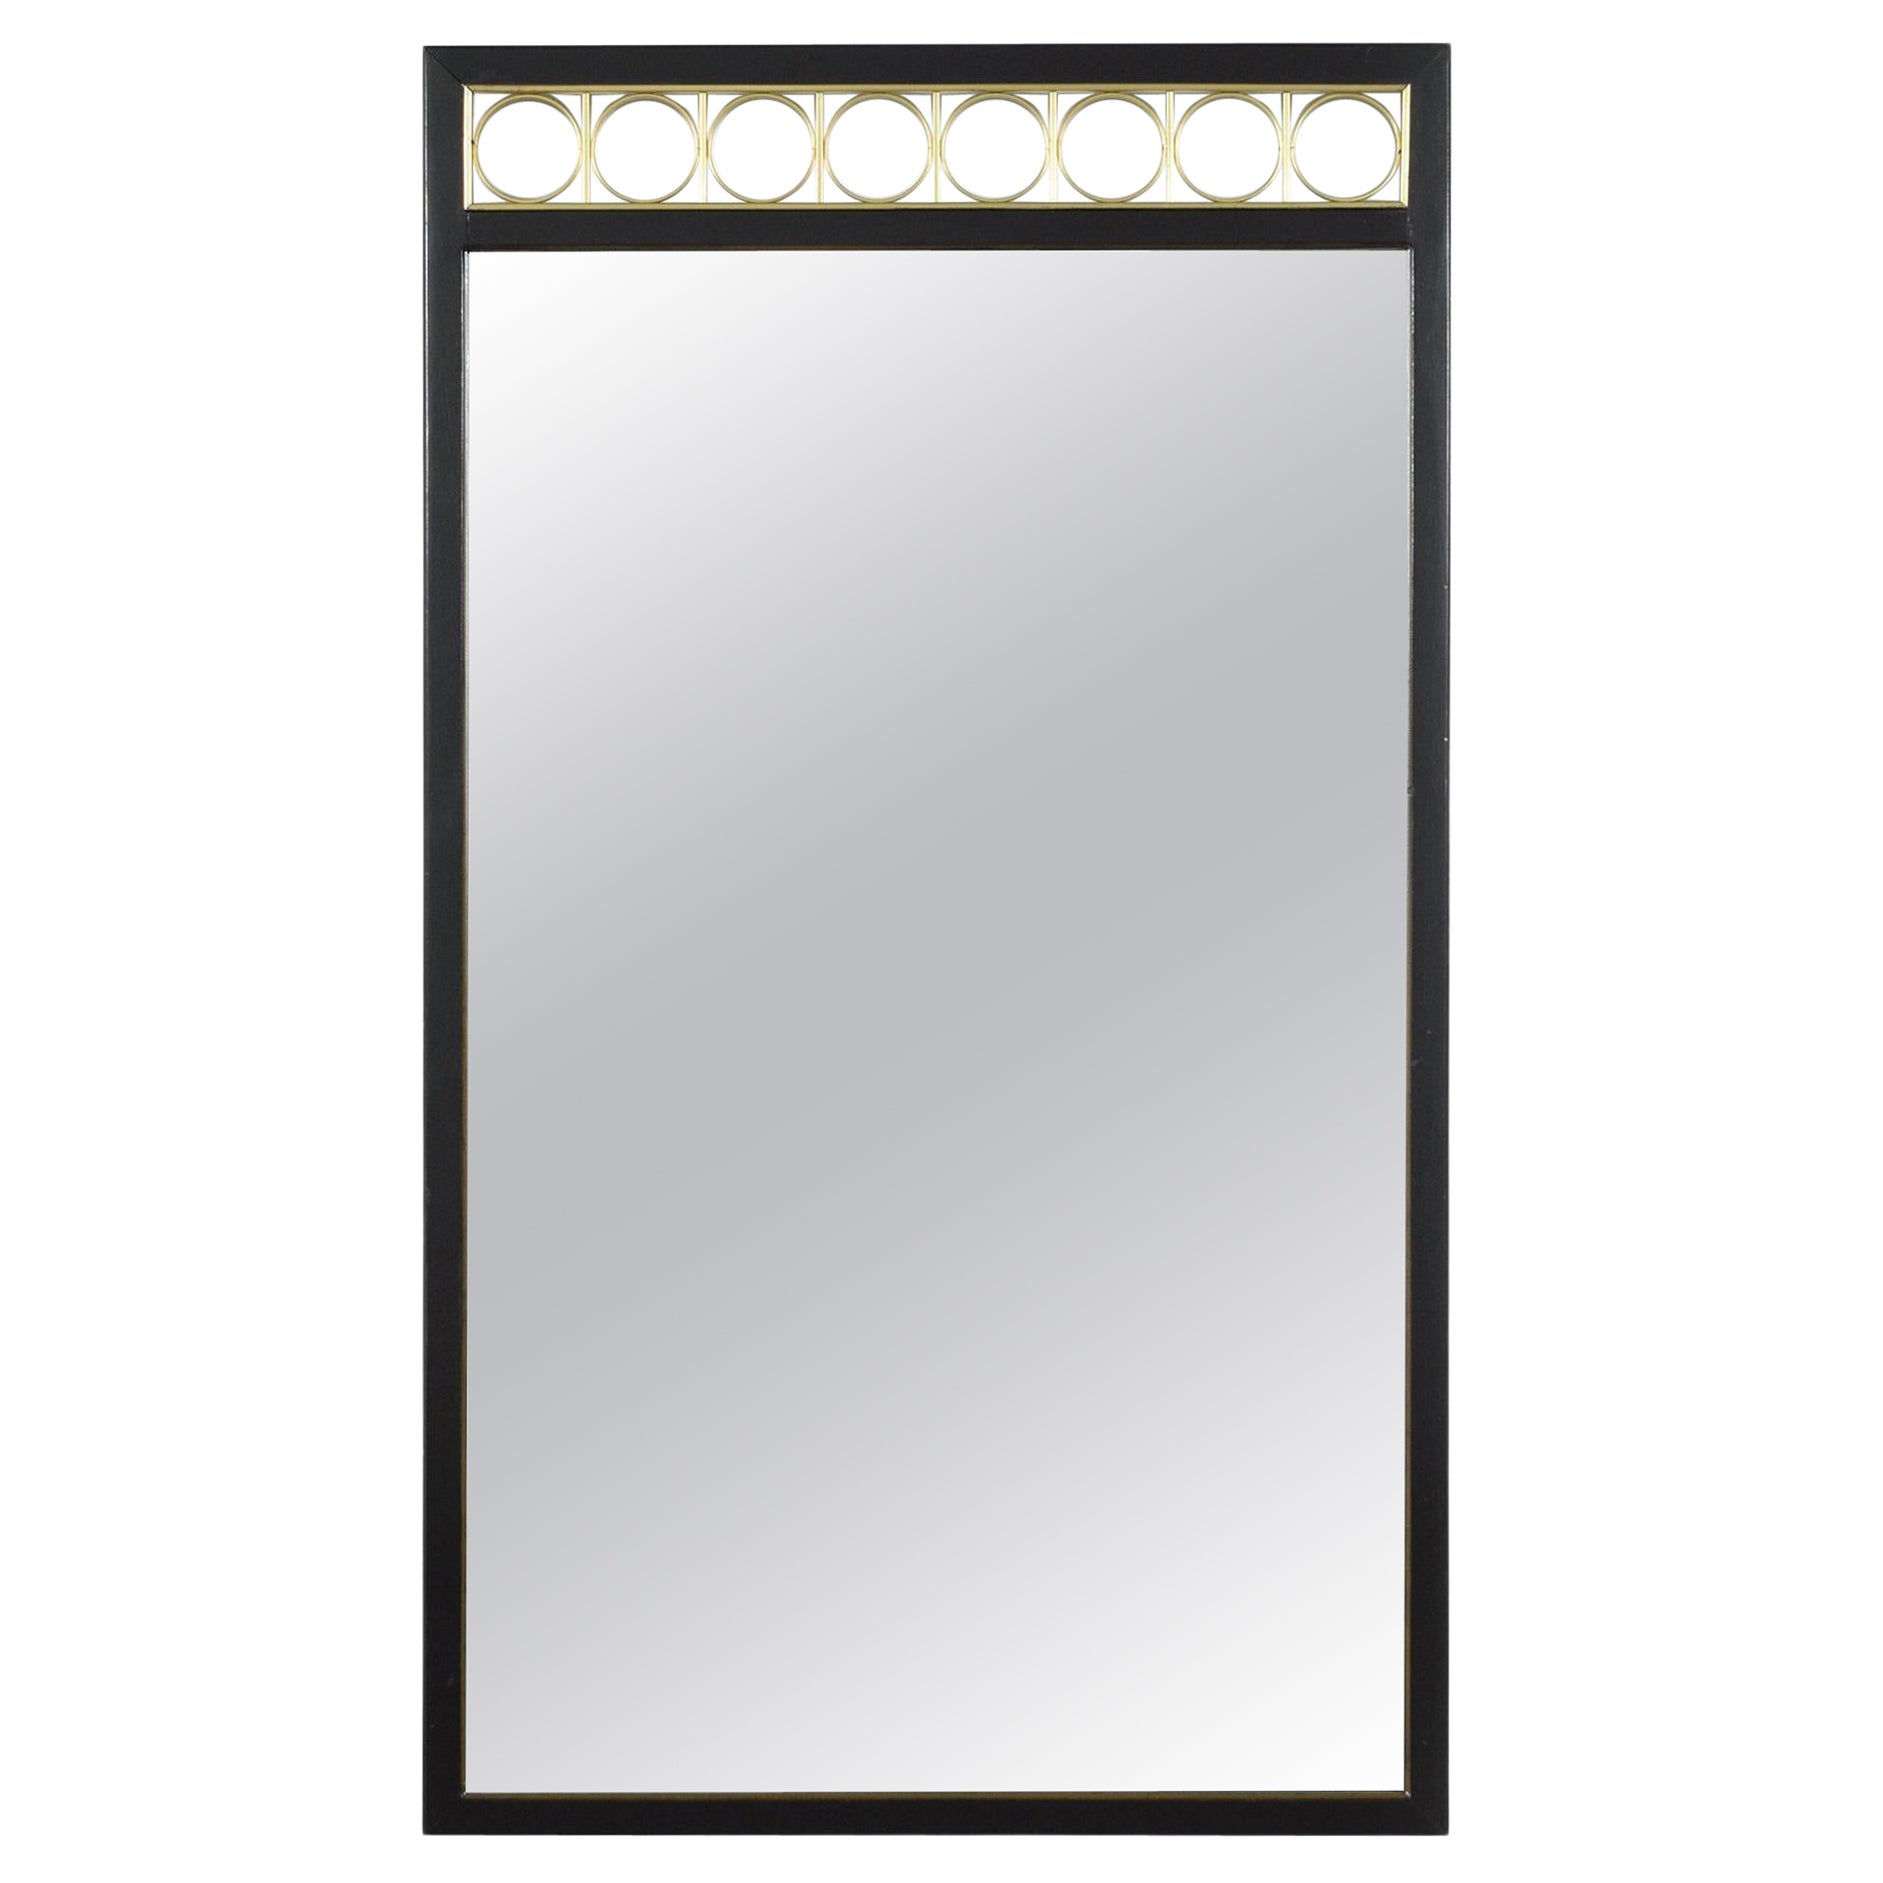 Elegance Midcentury Mahogany Wall Mirror : Sophistication Timeless pour The Moderns en vente